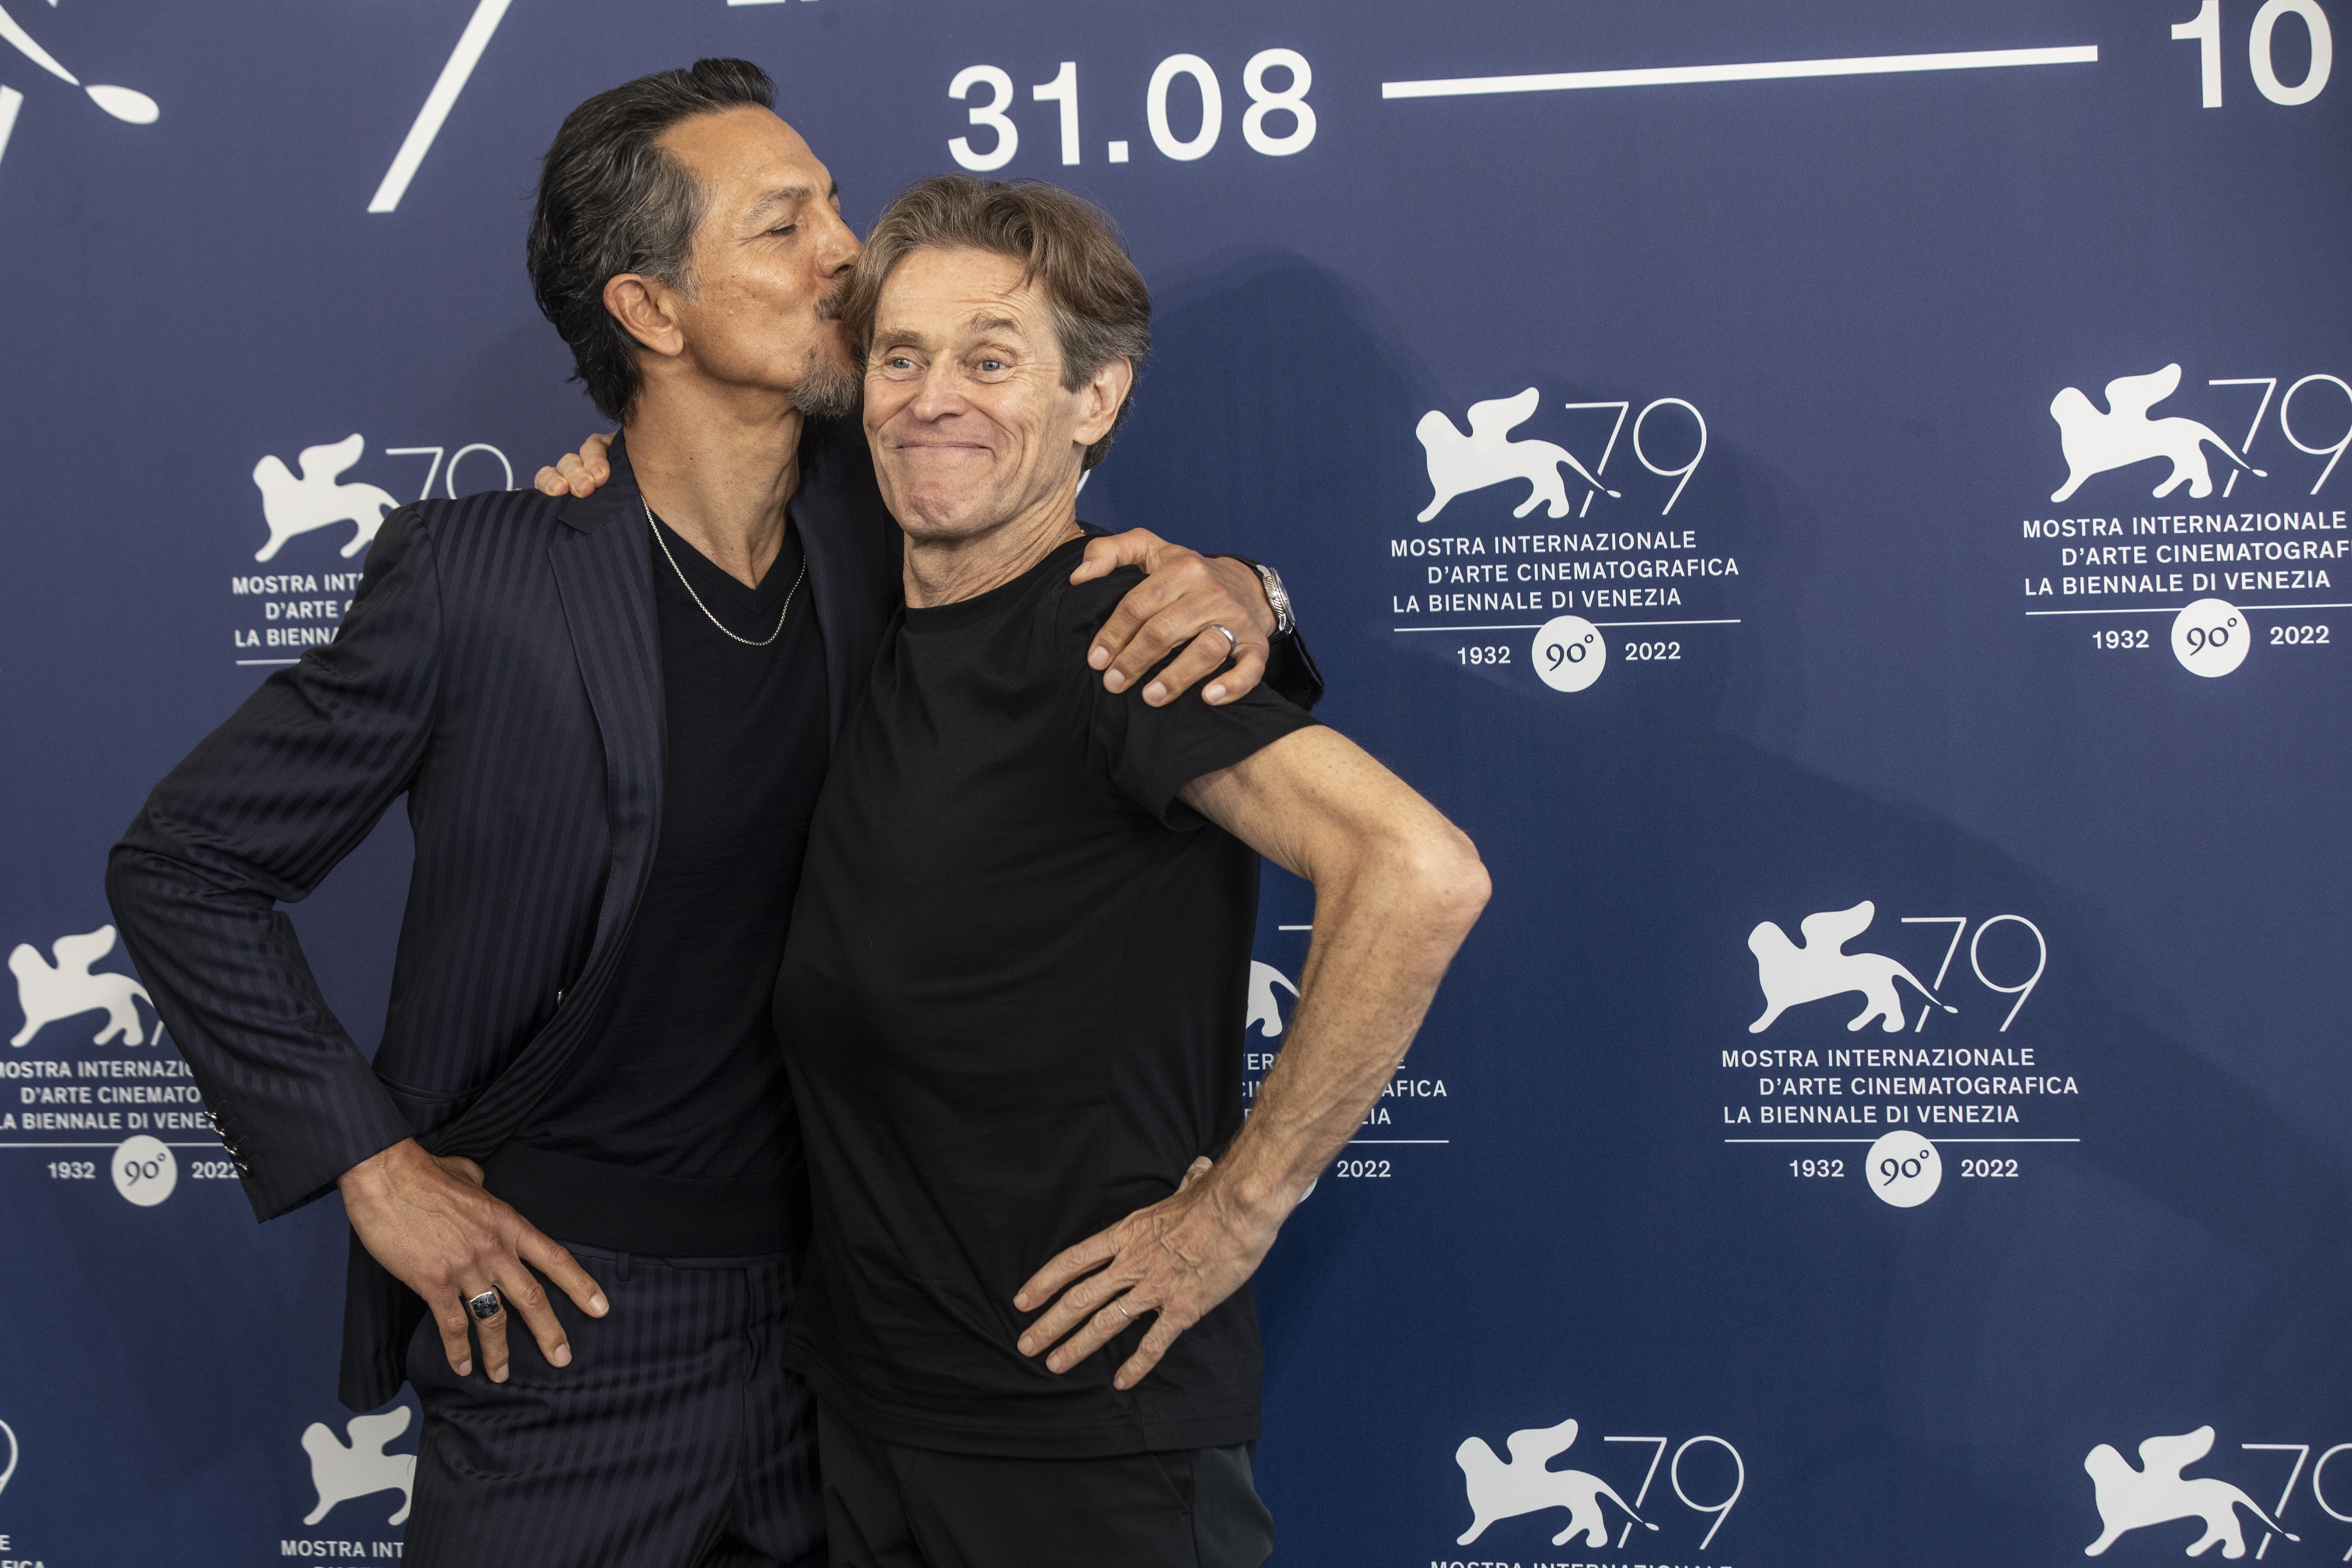 Benjamin Bratt and Willem Dafoe during the 79th Venice International Film Festival on September 6, 2022, in Venice, Italy. | Source: Getty Images